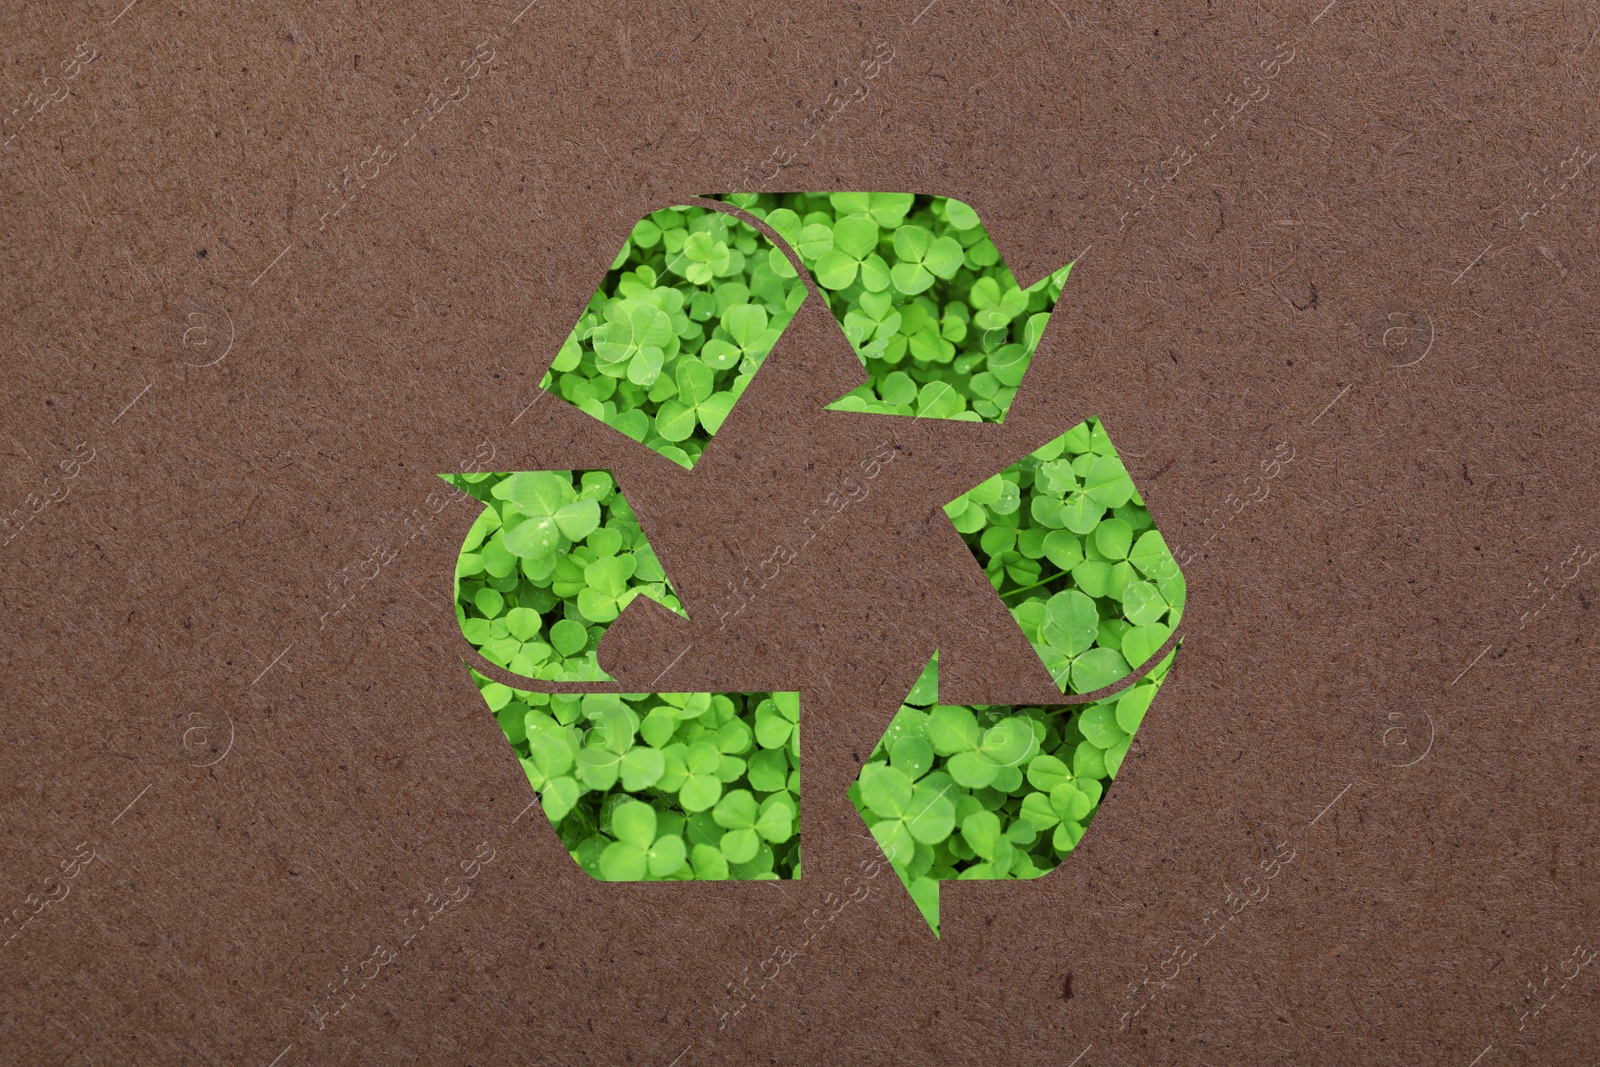 Image of Recycling symbol made of green leaves on kraft paper